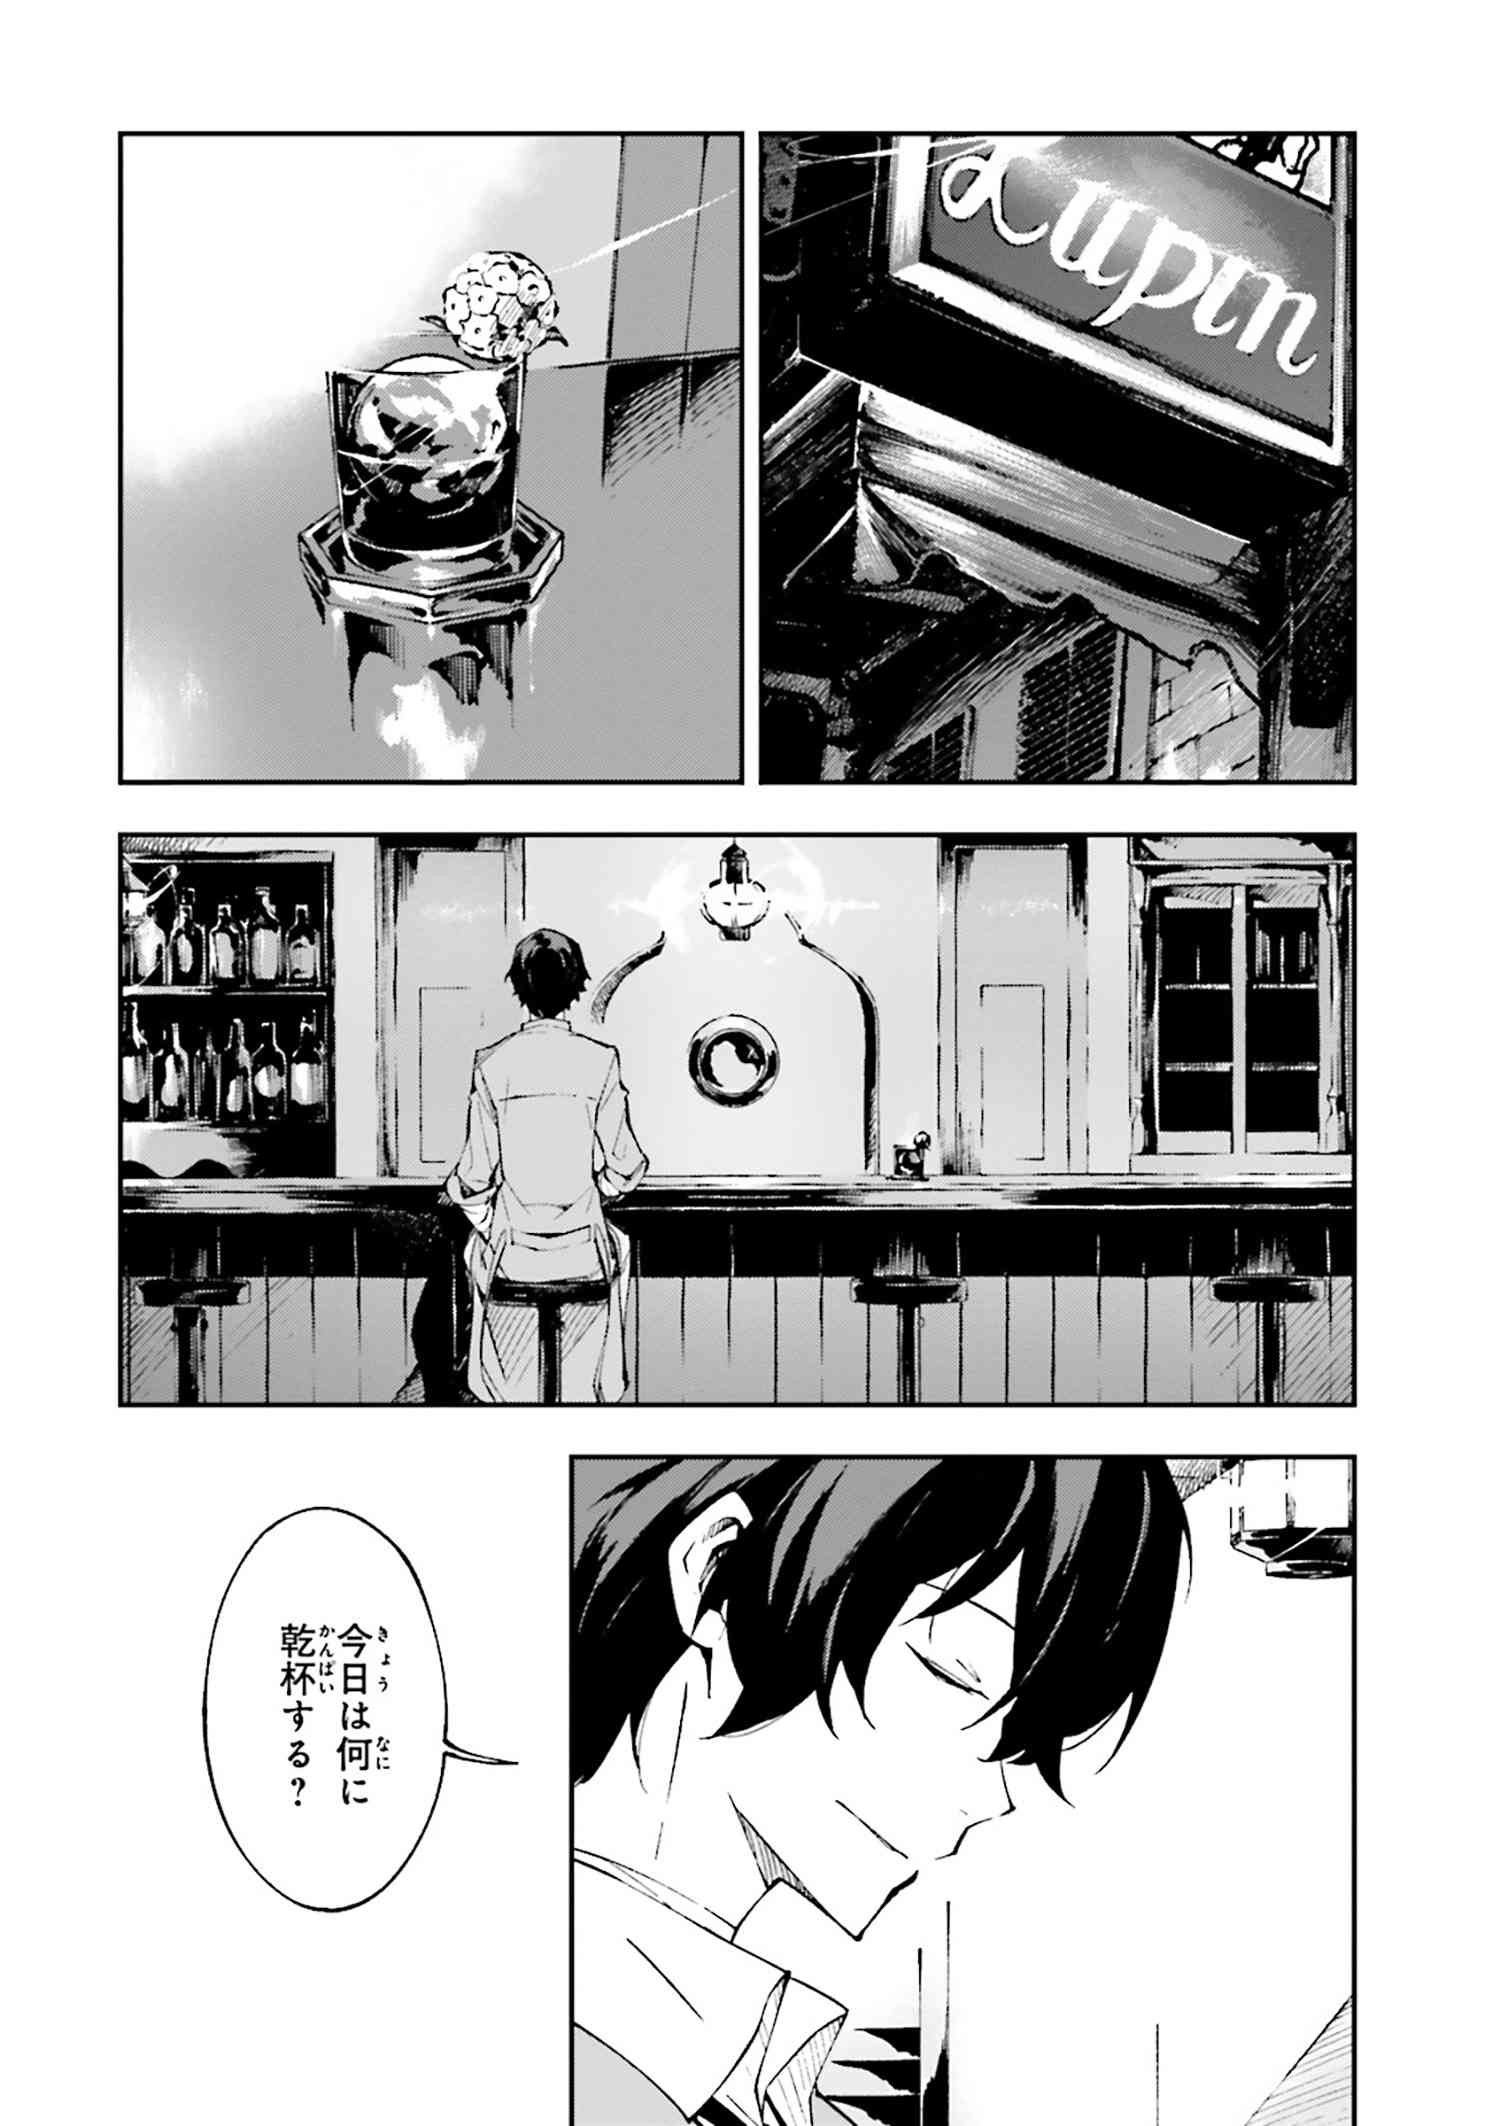 Bungou Stray Dogs: Dead Apple - Chapter 1-2 - Page 1